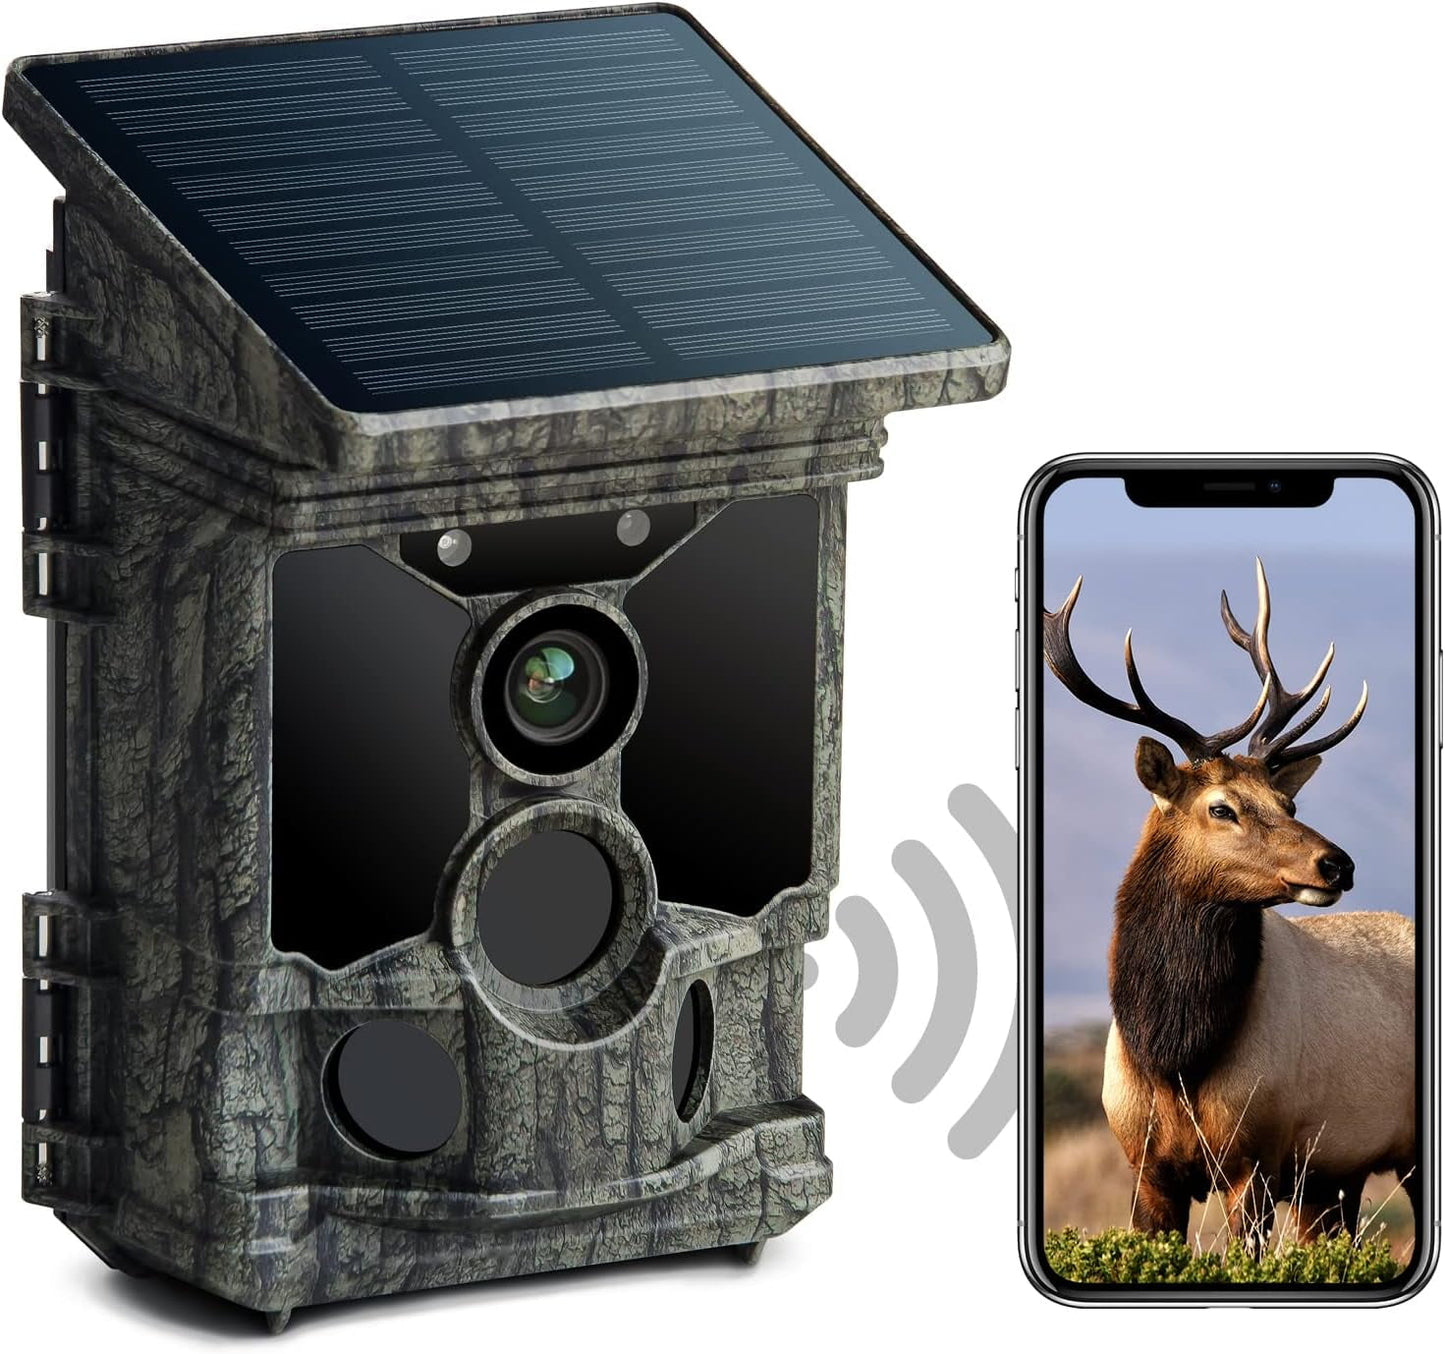 TOGUARD Solar WiFi Bluetooth Trail Camera 4K Native 46MP Deer Game Camera Wildlife Hunting with 3 PIR LEDs Night Vision 0.1s Motion Activated Waterproof IP66 120° Wide Angle 2.0" LCD Trail Cam